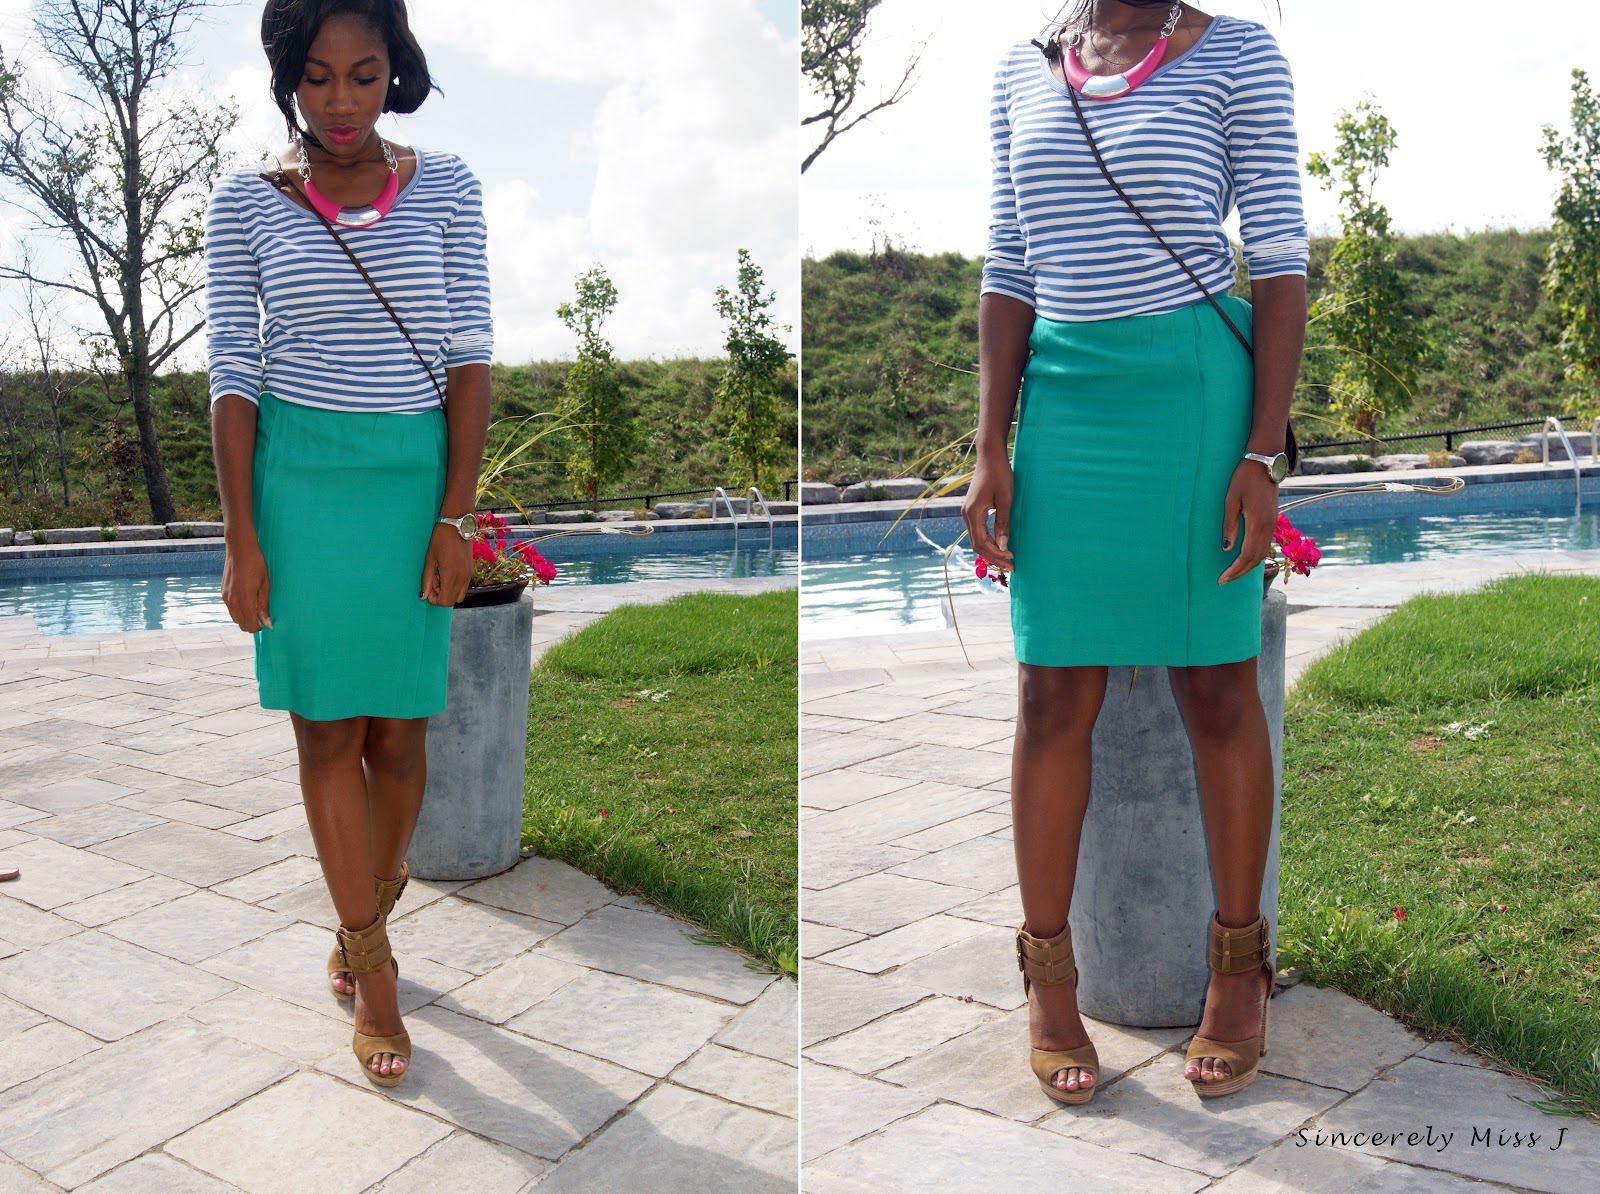 Cool mint skirt and striped top - style tip from toronto blogger